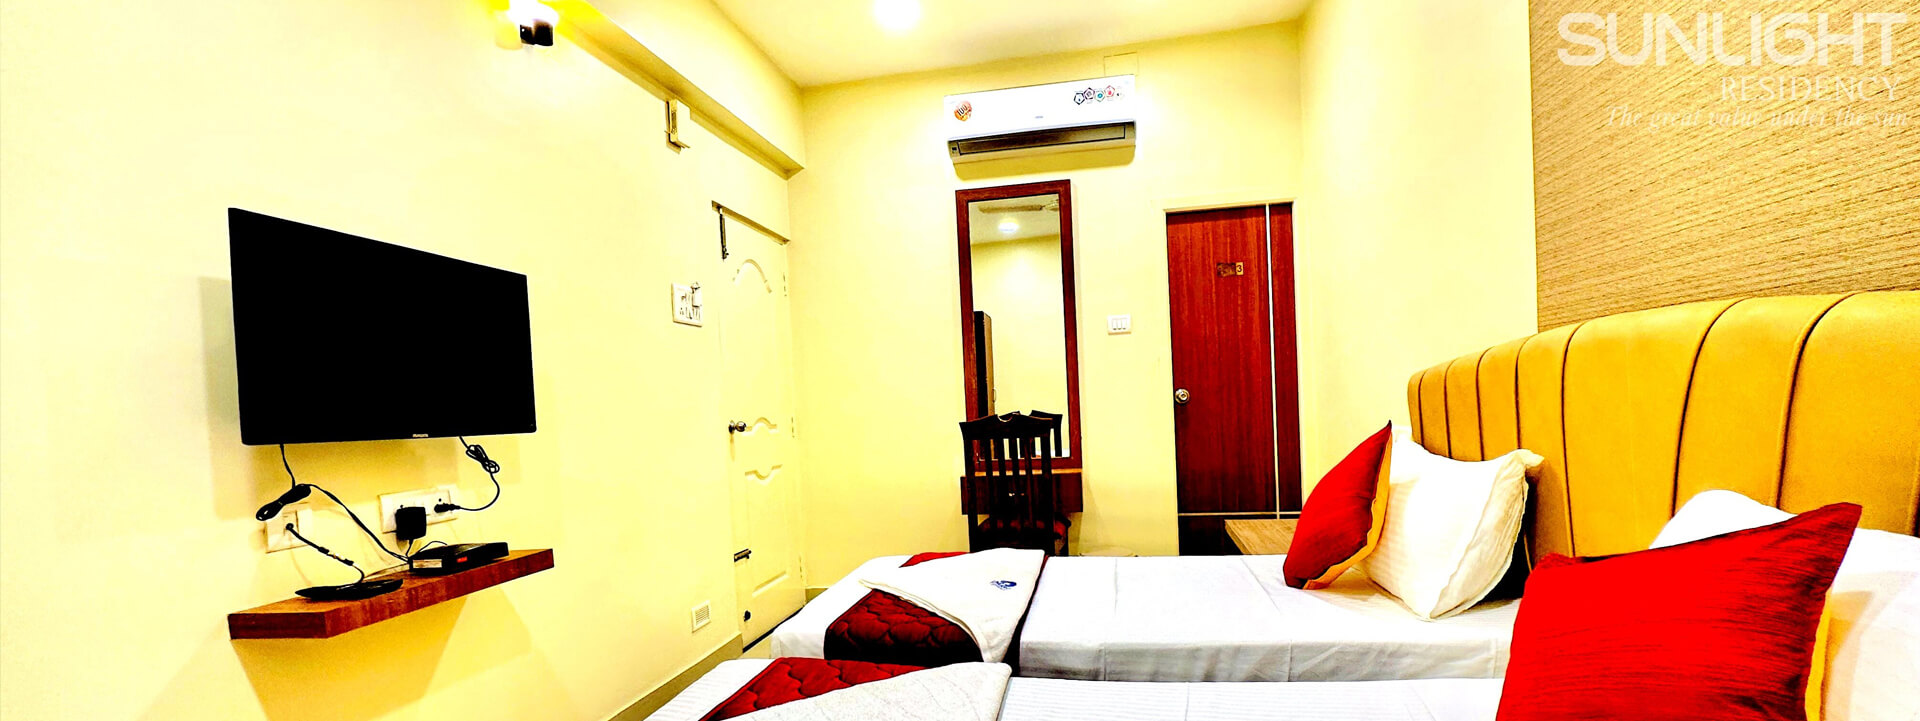 are you looking for hotel rooms near chennai airport?